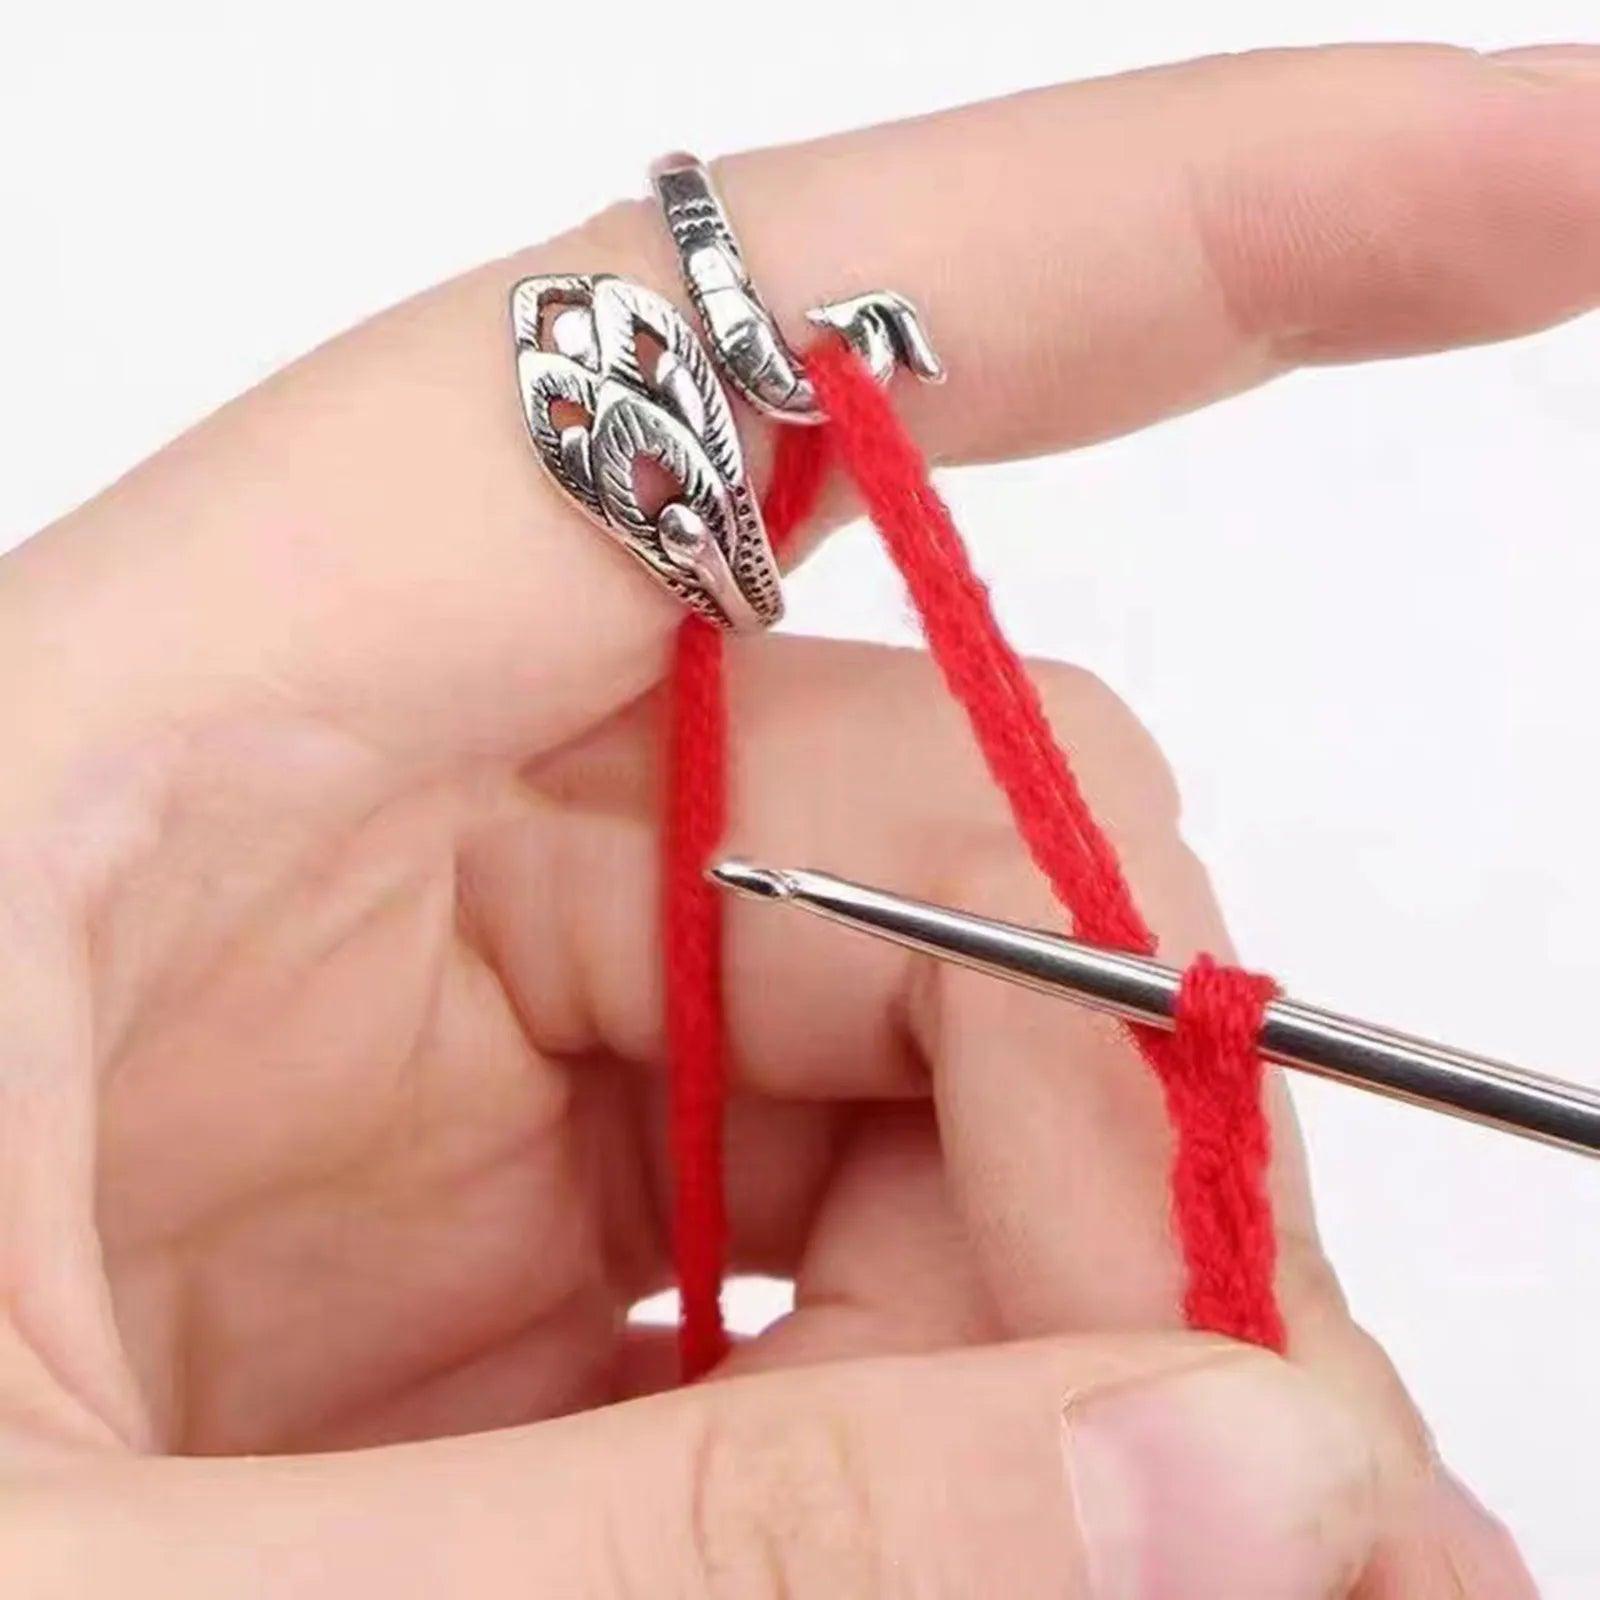 Metal Peacock Finger Ring Knitting Tool Set with Blade Needle and Yarn Guide  ourlum.com   